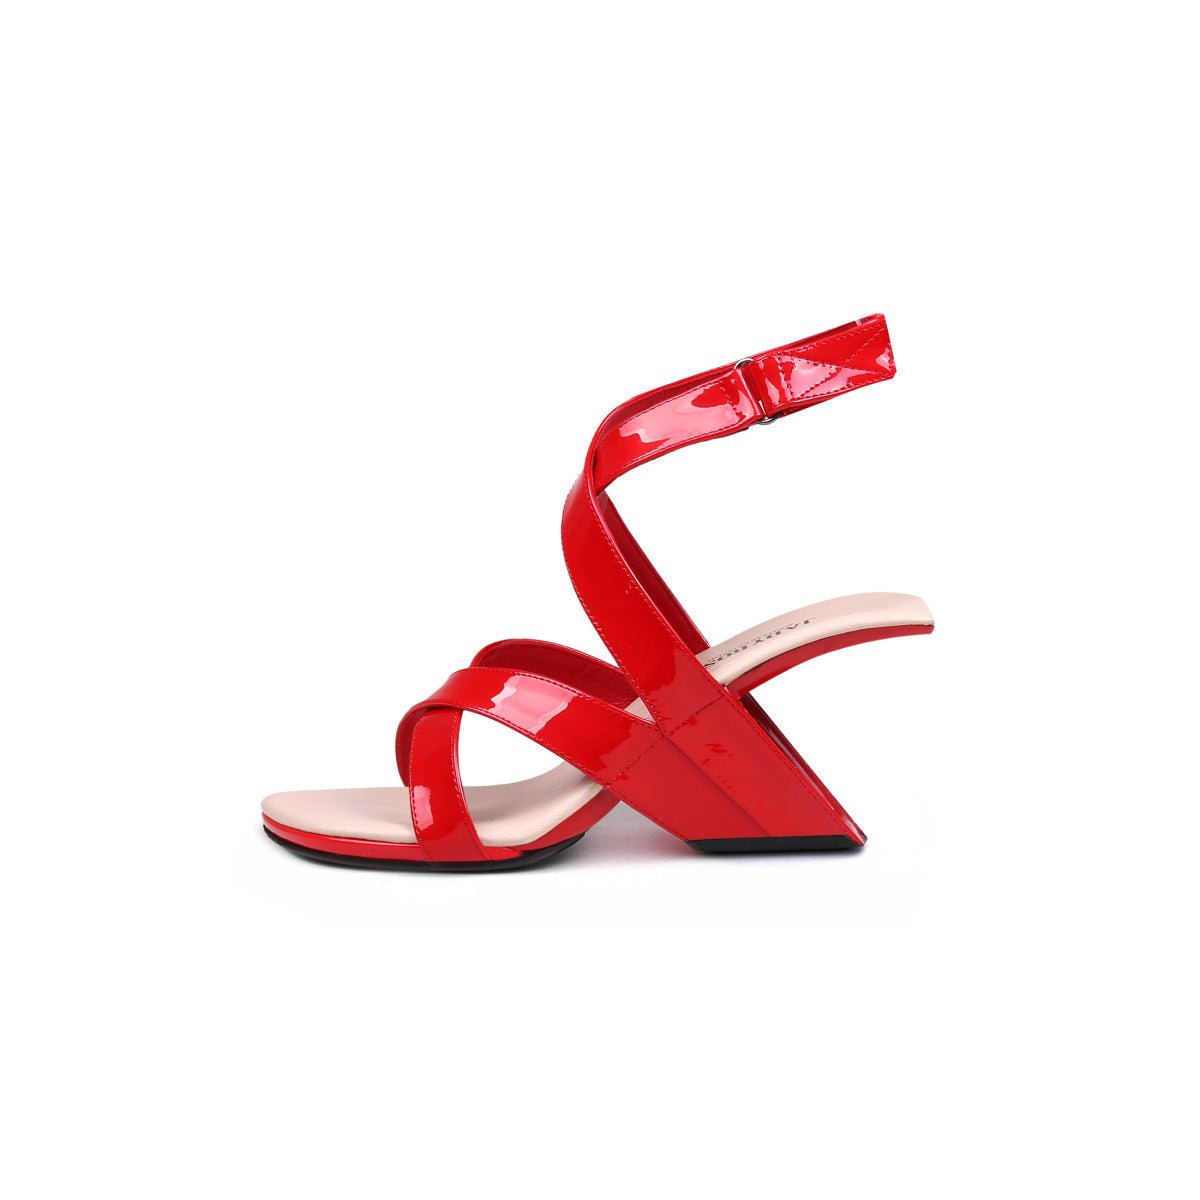 Crossing Snowflakes High Heeled Red Sandals - 0cm